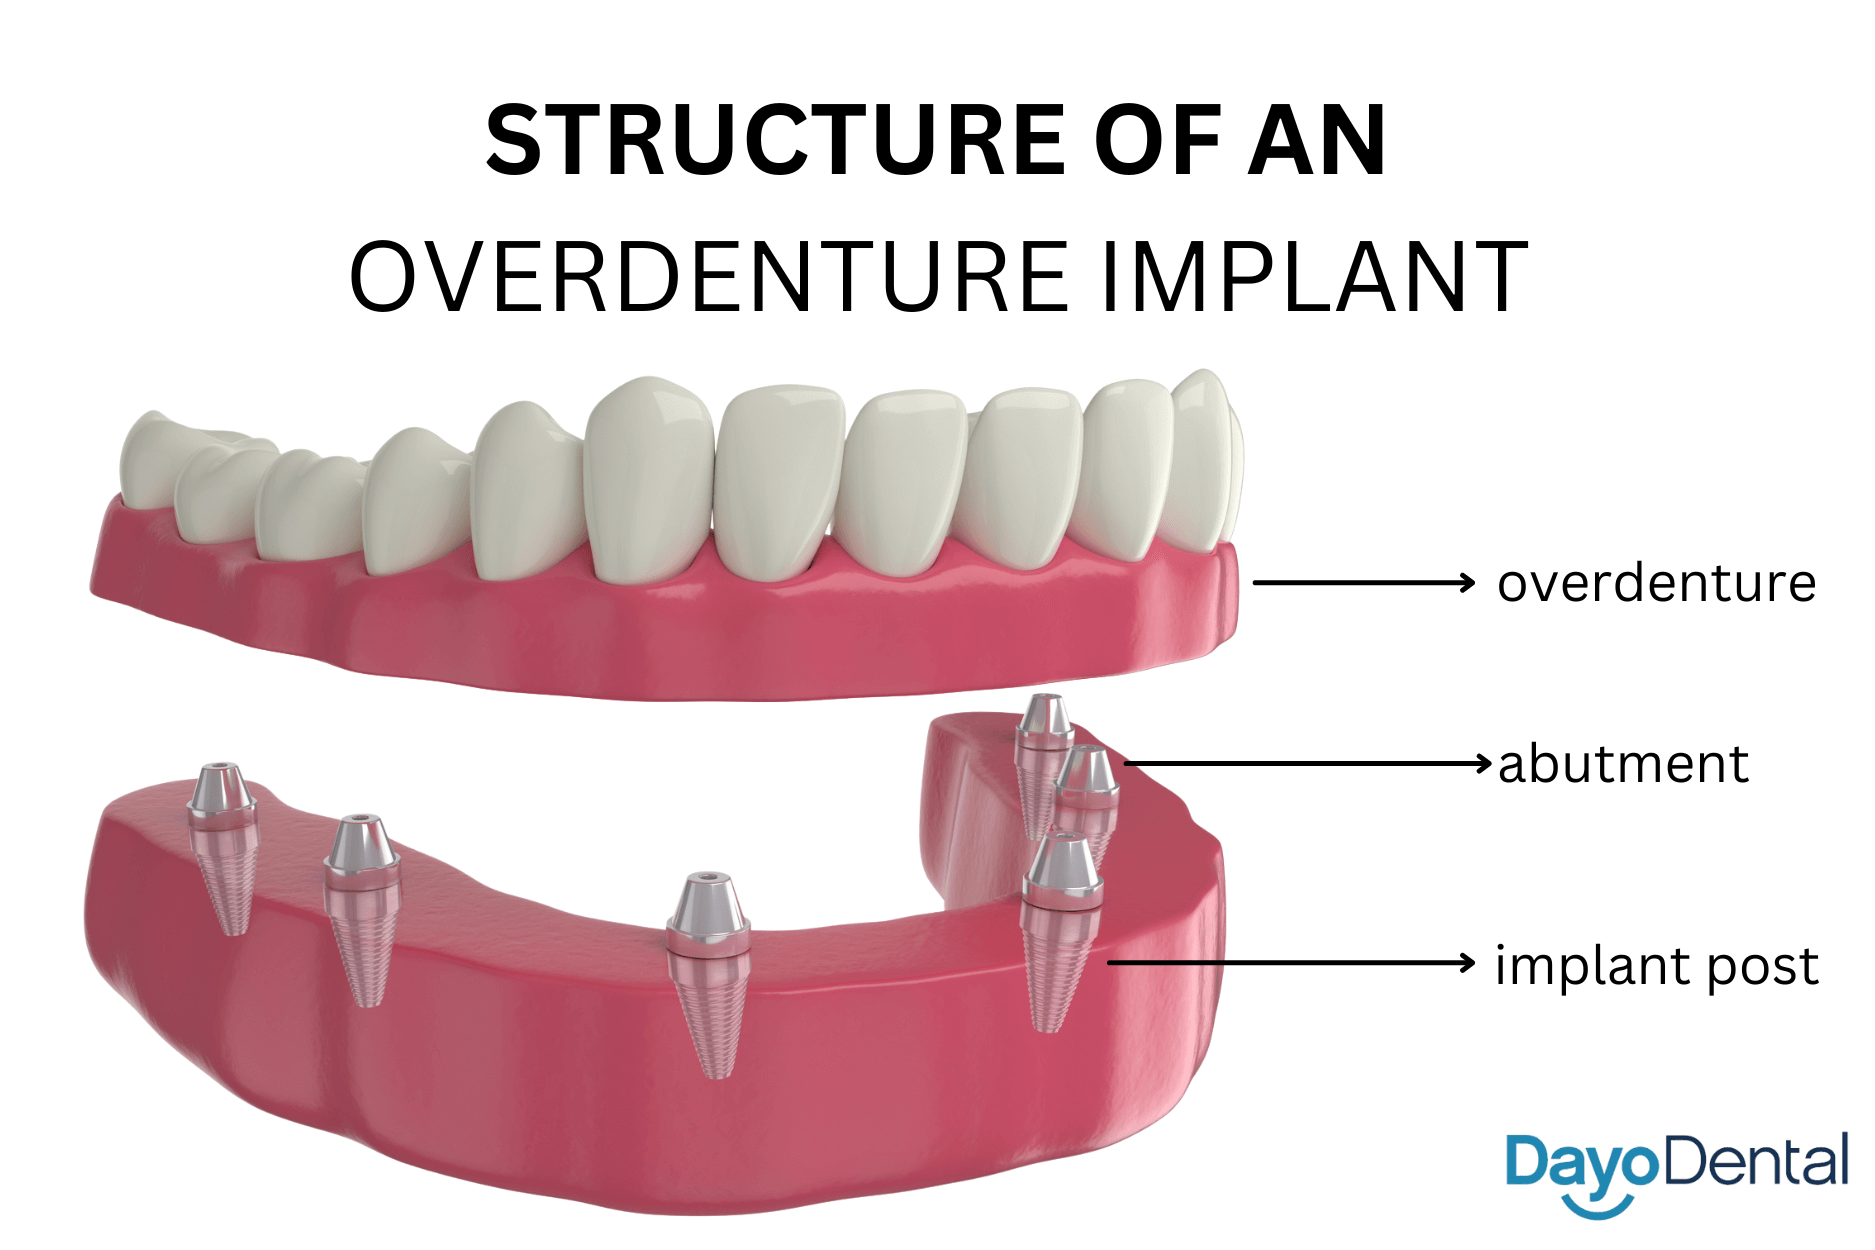 Structure of an overdenture implant